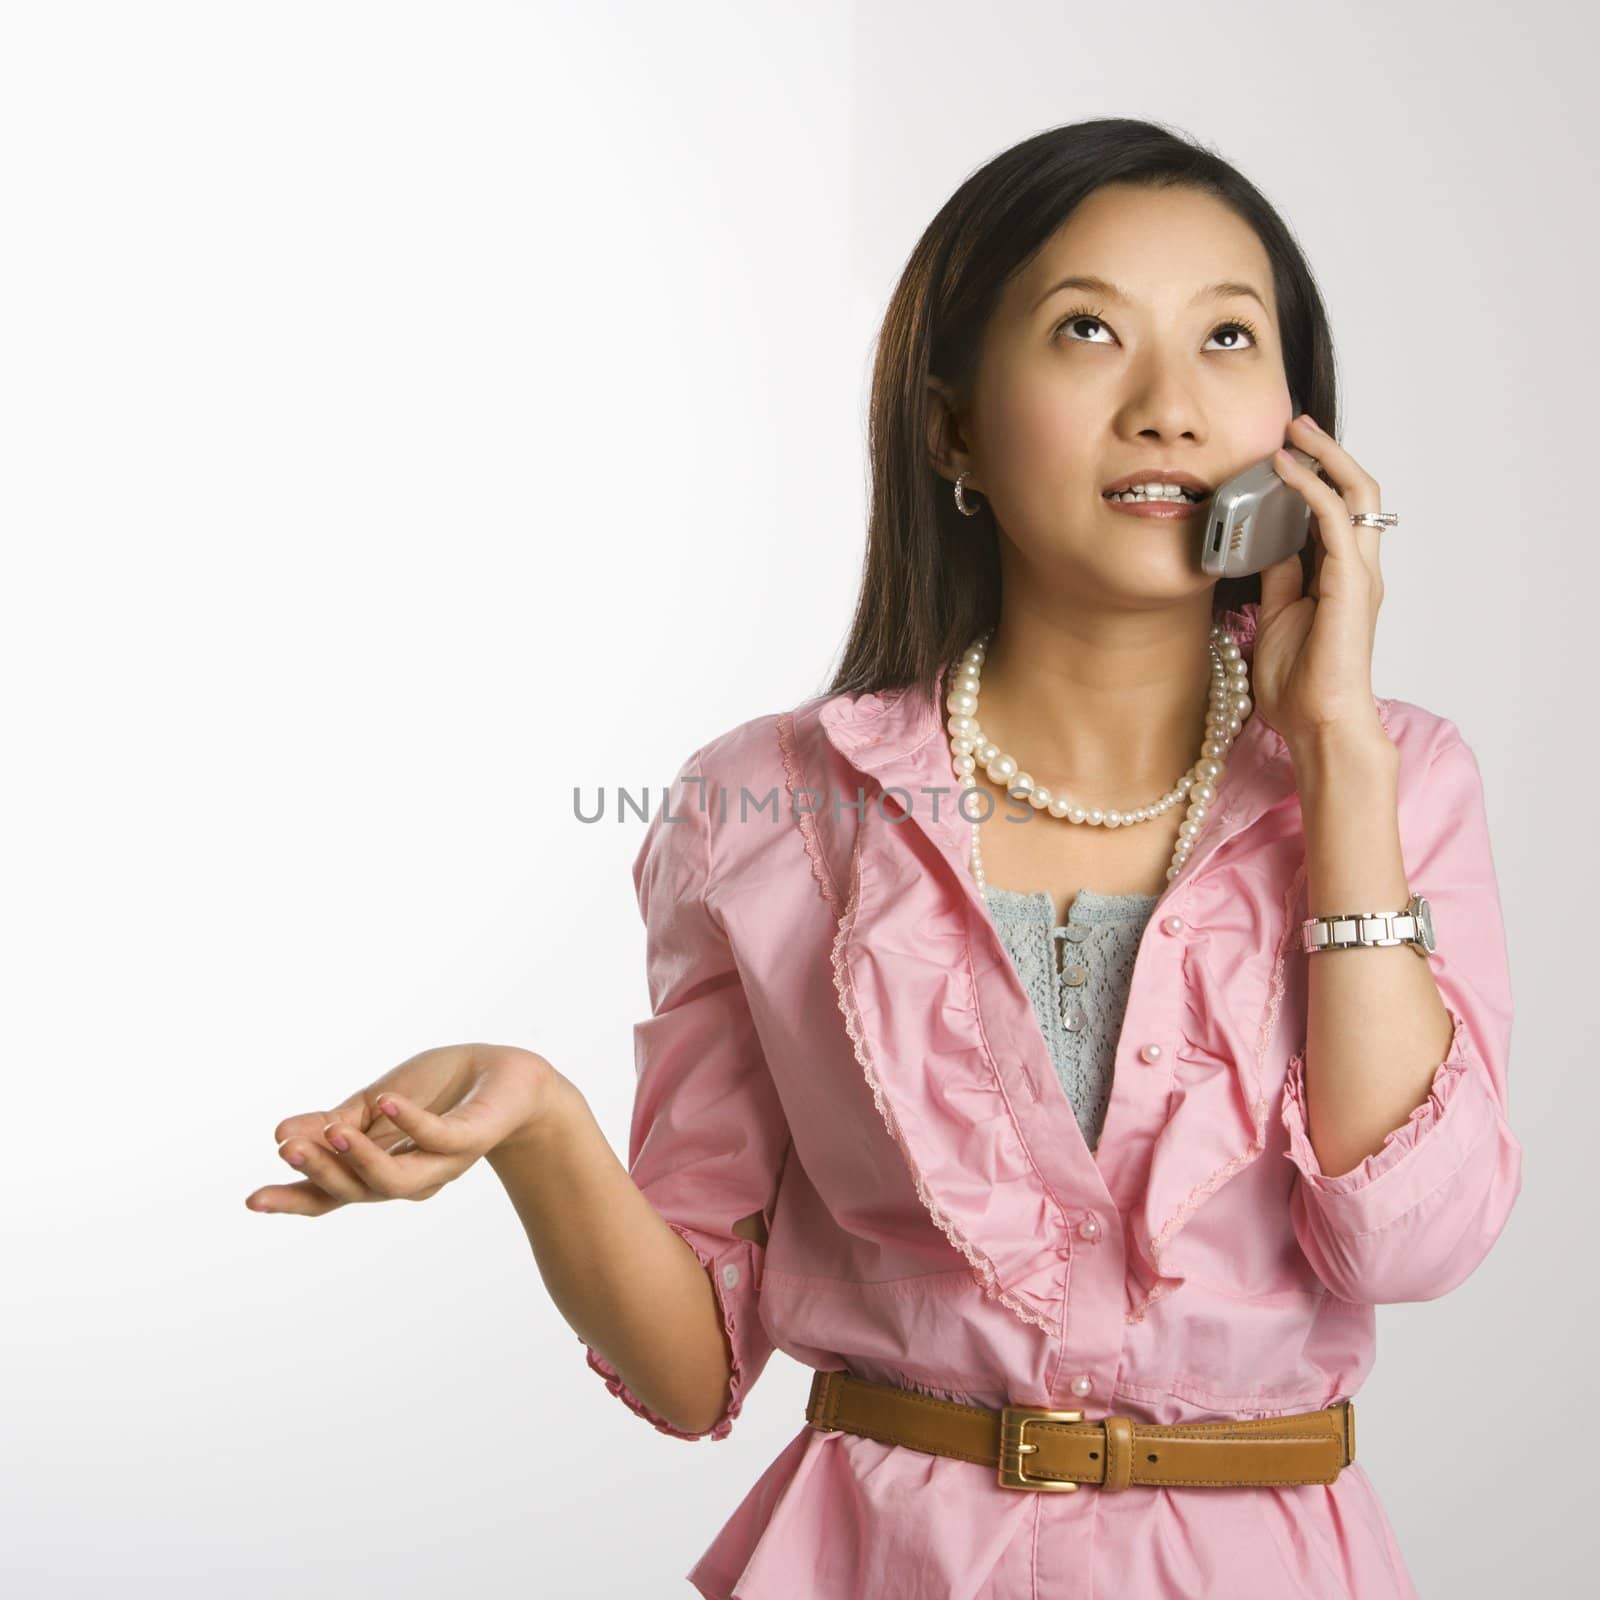 Portrait of Asian Chinese mid-adult female with hand out, looking up and talking on cell phone.